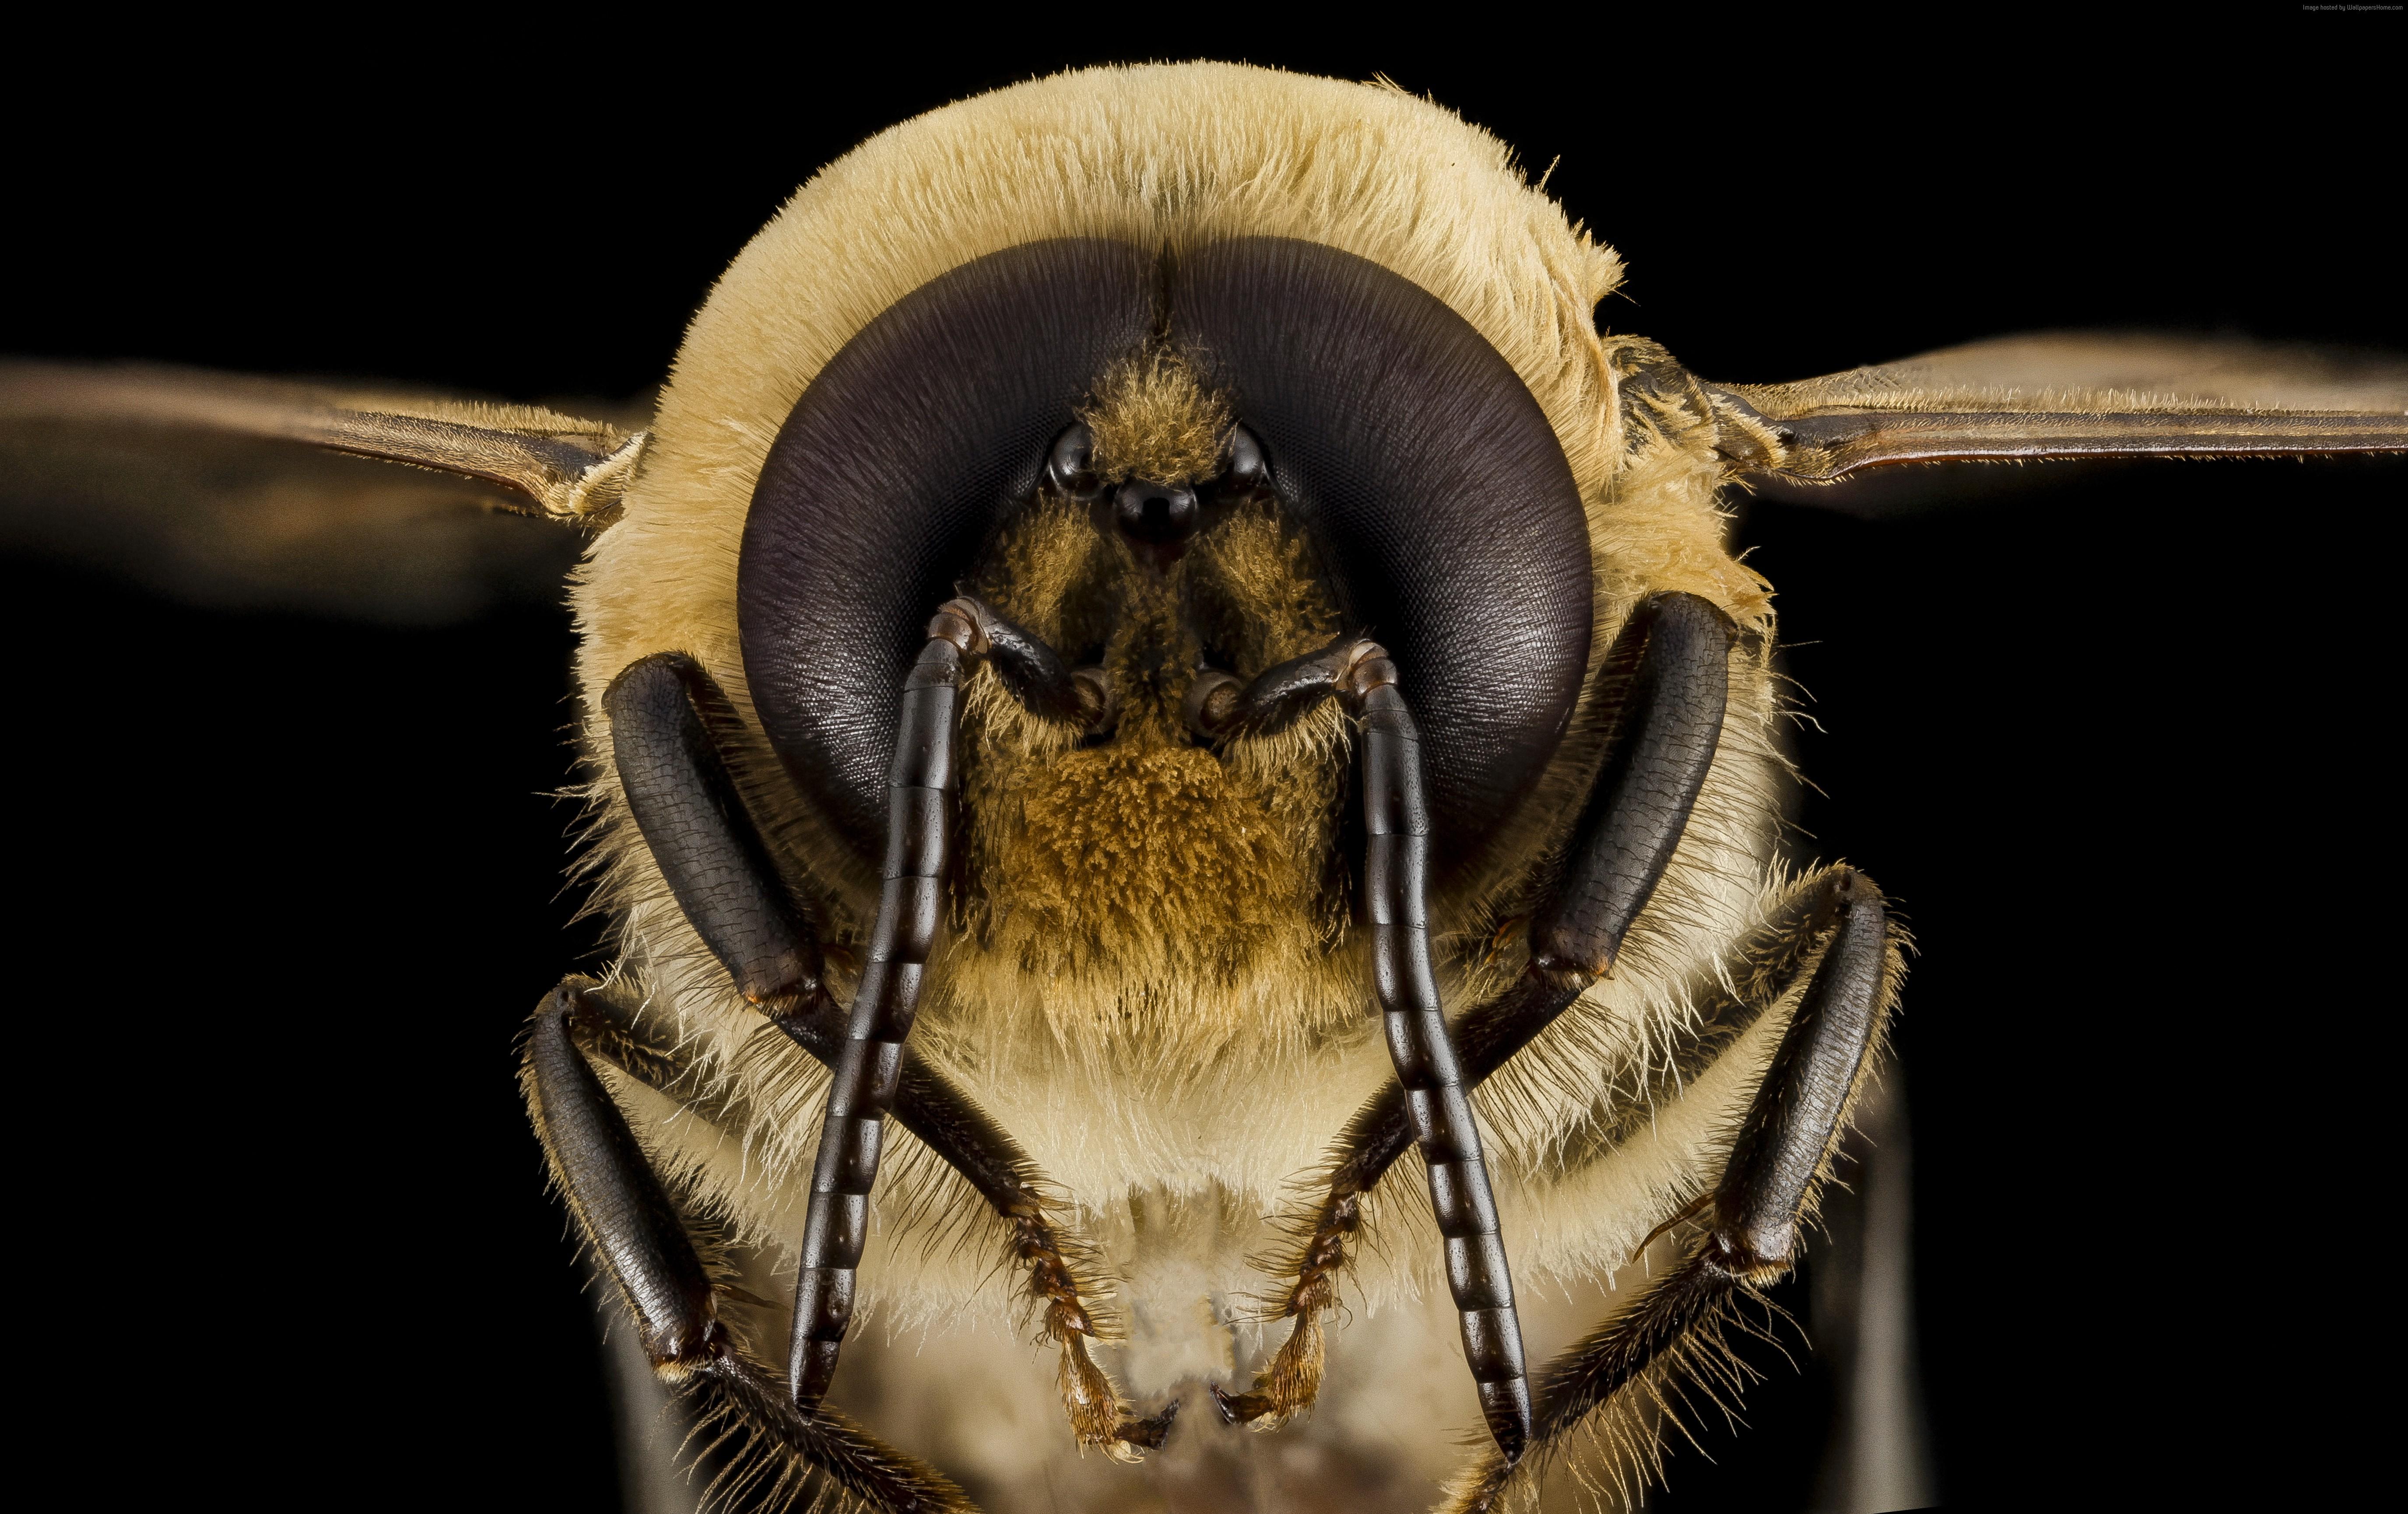 #eyes, #bumblebee, #insect, #black background, #wings